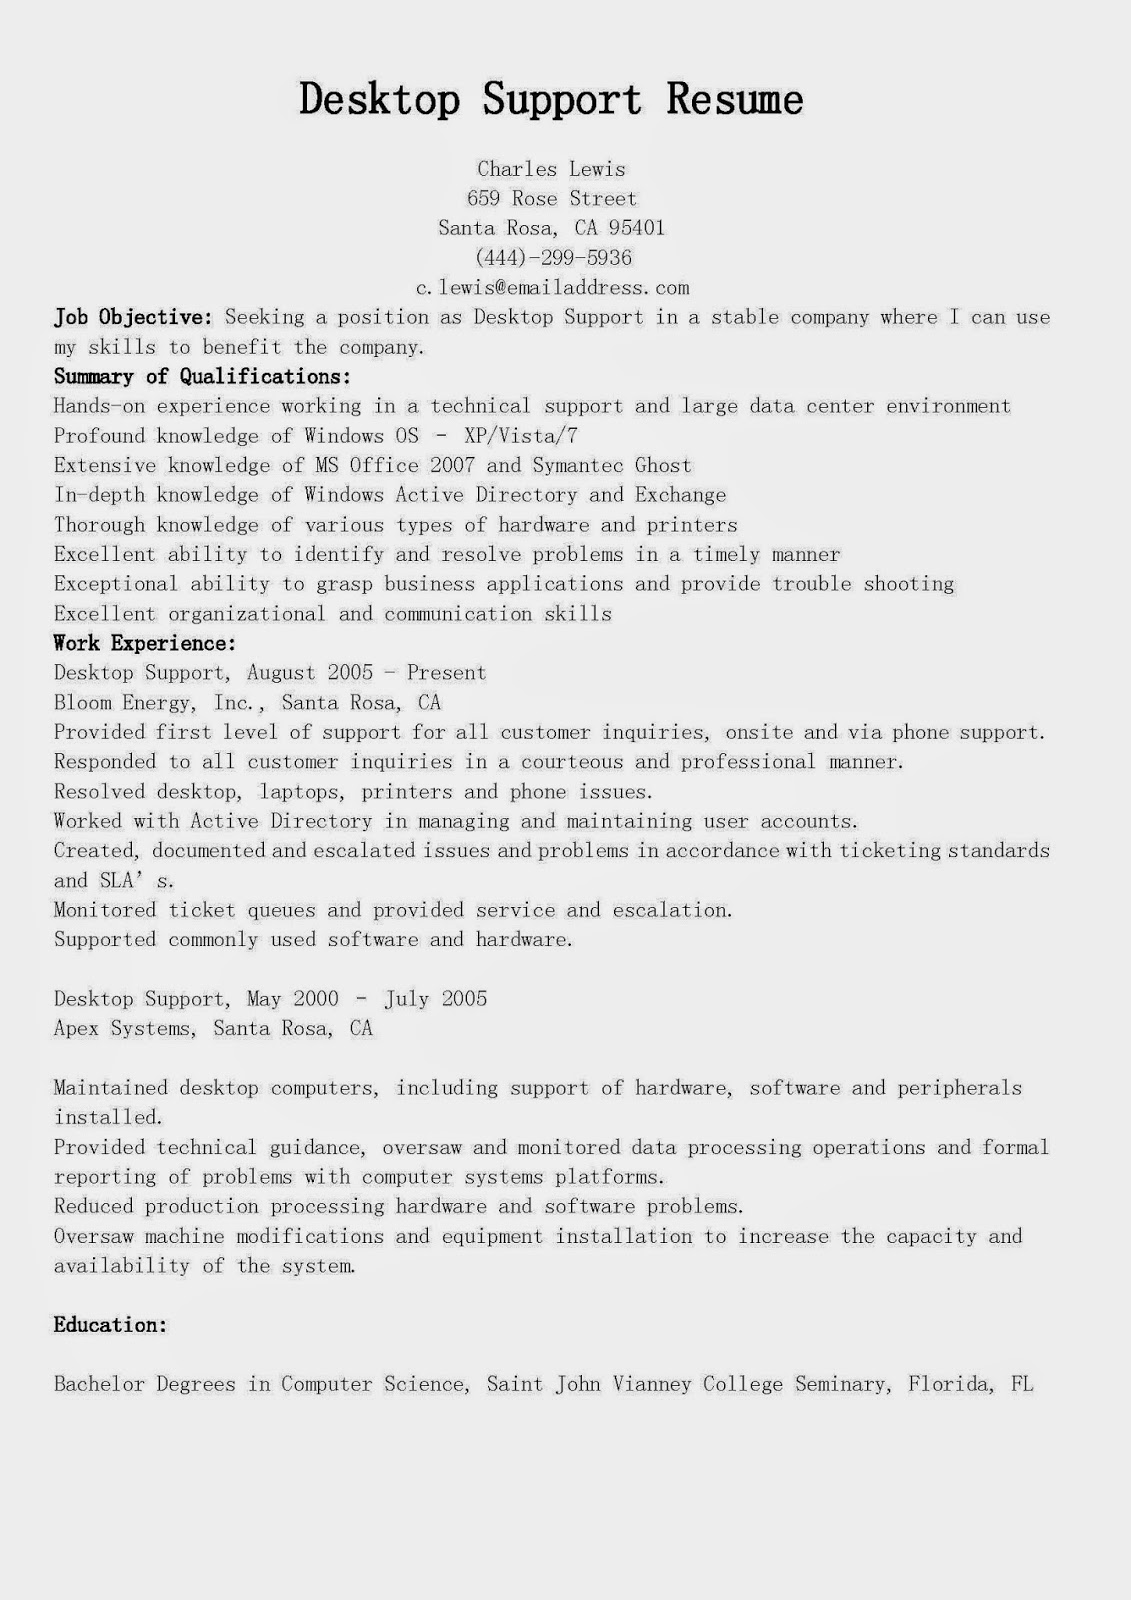 Technical support objective resume